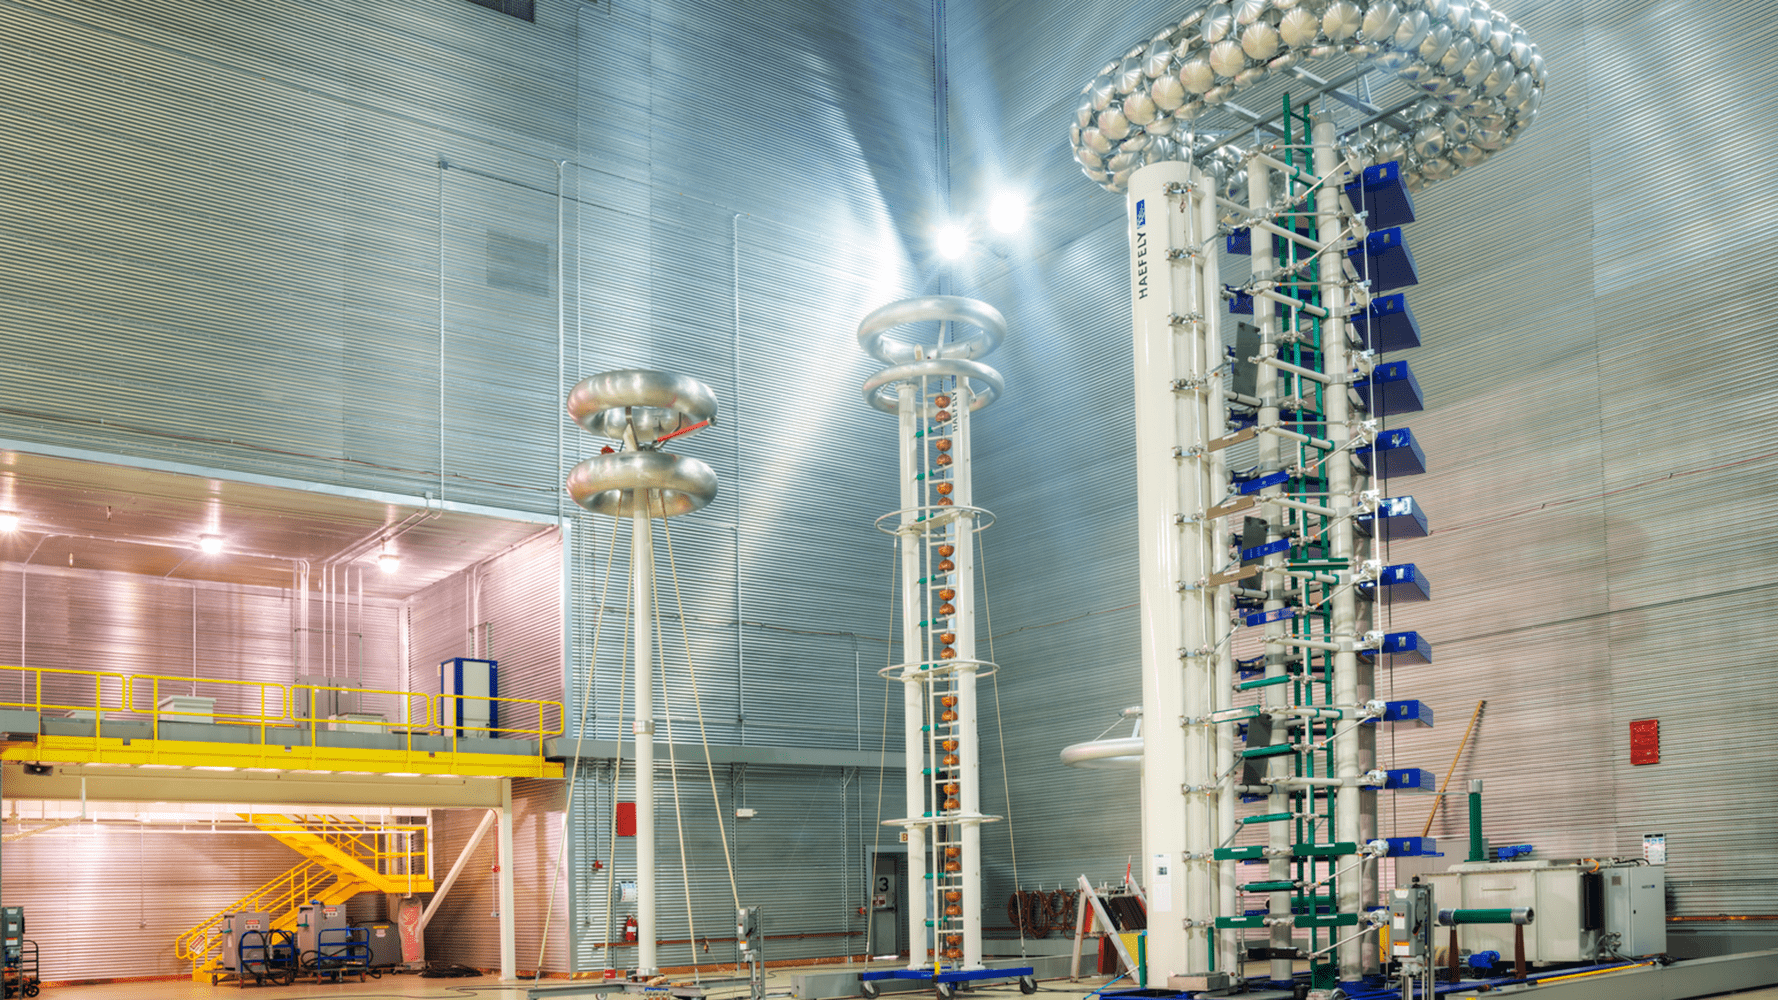 Interior of power plant with gray walls